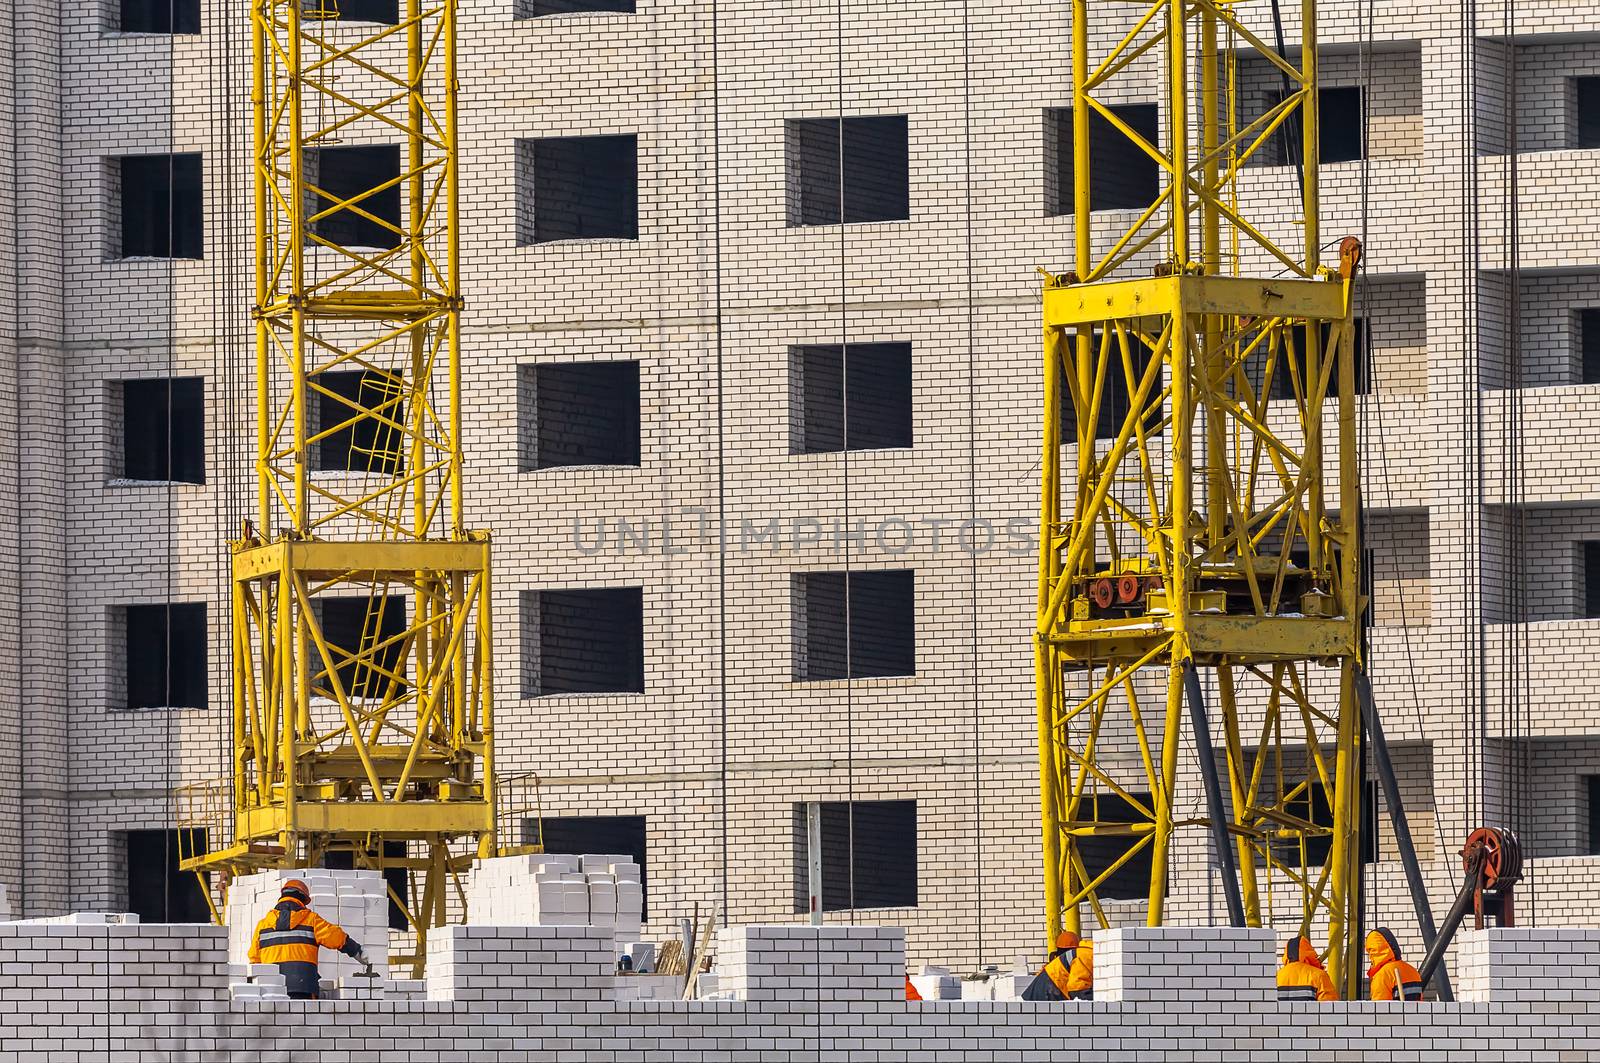 View of Construction Site With Unfinished Apartment Building, Cranes’ Bases and Construction Workers Dressed in Orange Outfit